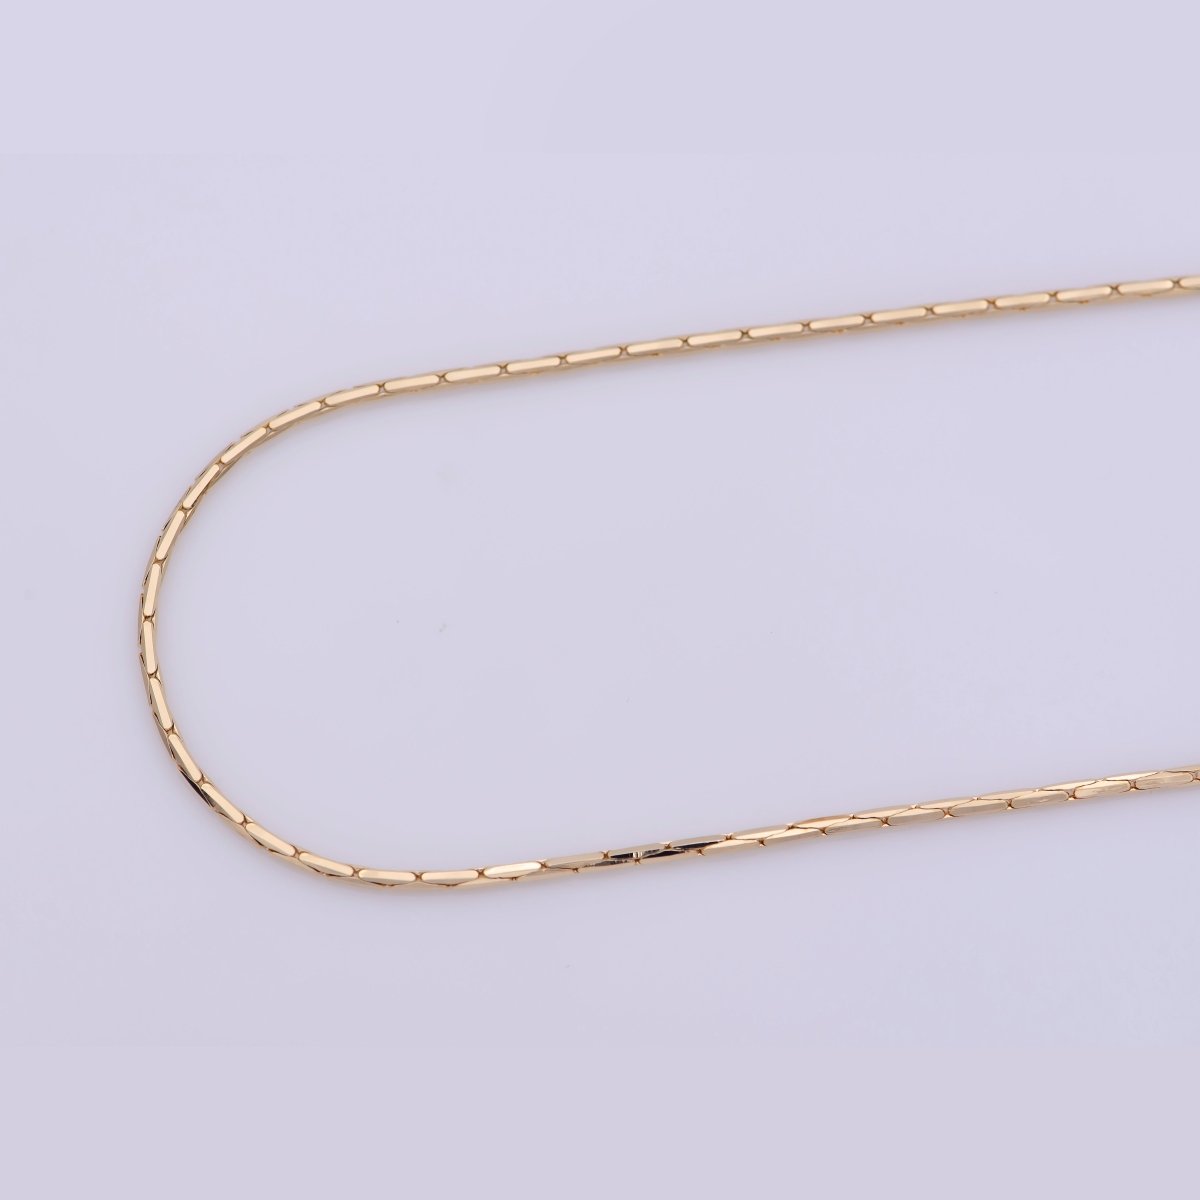 17.5 inch, 23.5 Beading Crimpable Chain Necklace, 18K Gold Plated Designed Finished Chain For Jewelry Necklace Making, Dainty 1.2mm Designed Necklace w/ Spring Ring | CN-389 CN-390 Clearance Pricing - DLUXCA